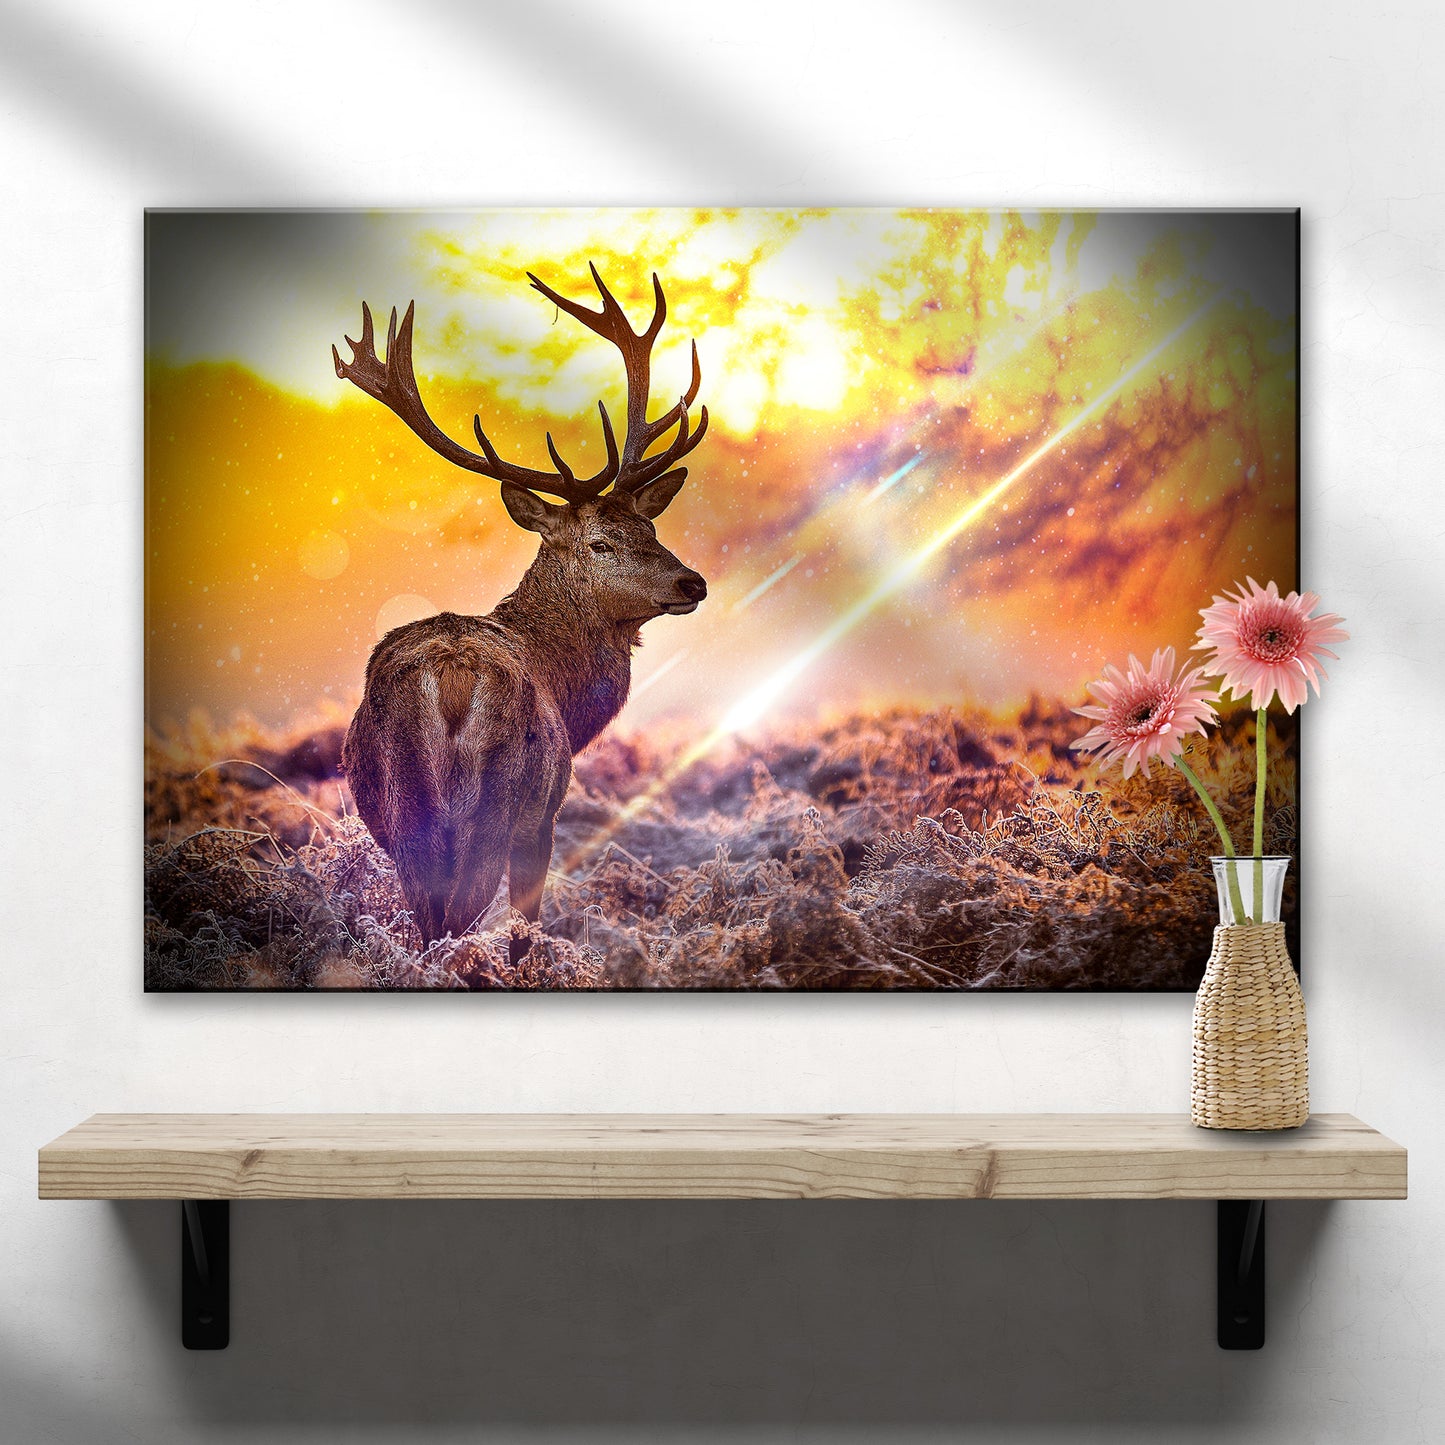 Deer Elk In Sunset Forest Canvas Wall Art - Image by Tailored Canvases